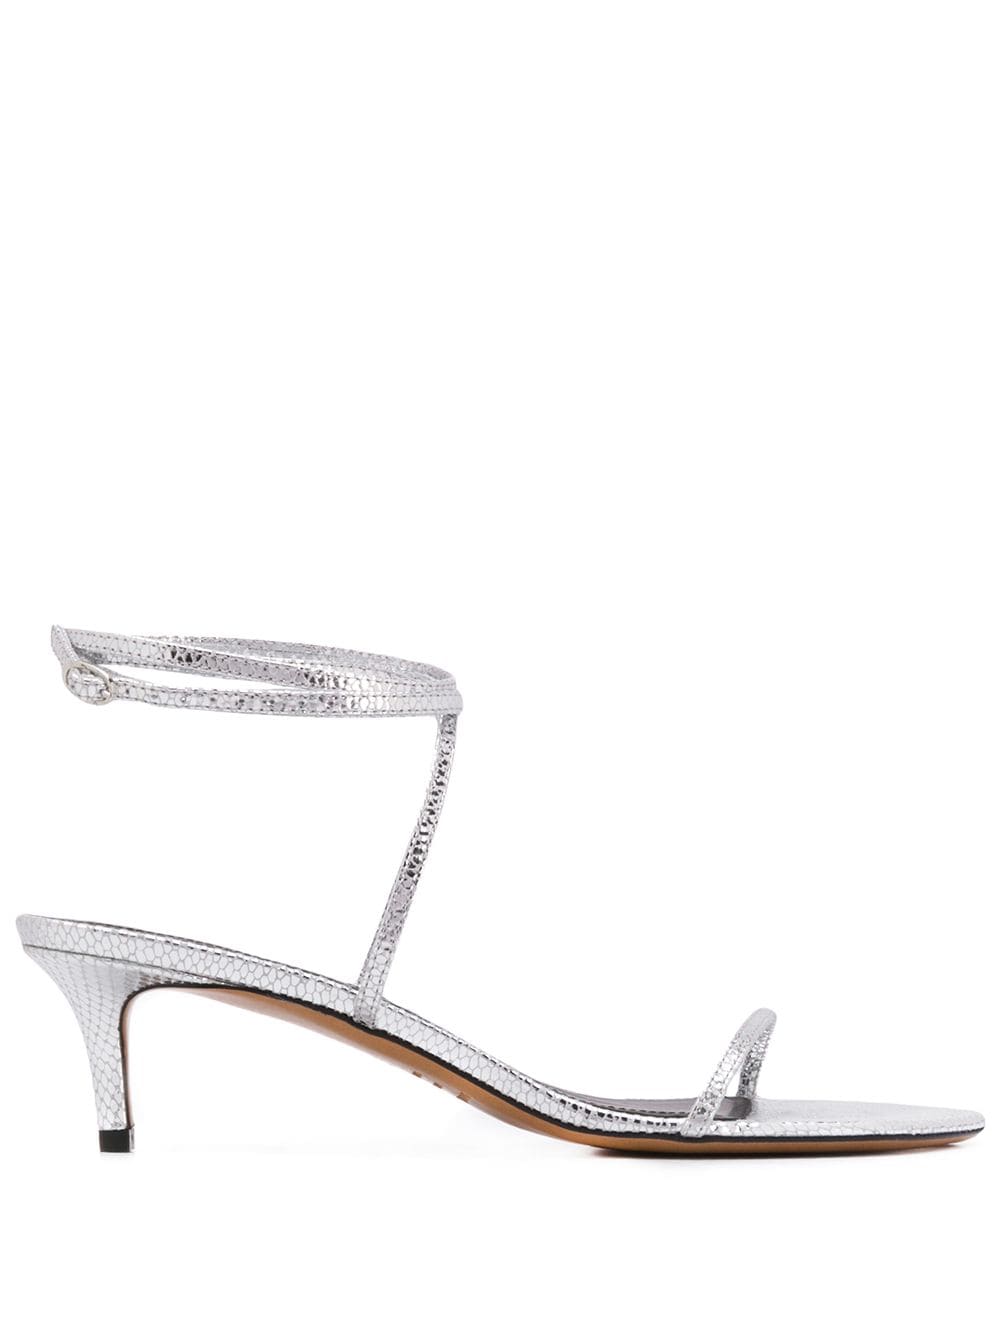 Isabel Marant 60mm Pointed Open Toe Sandals In Metallic